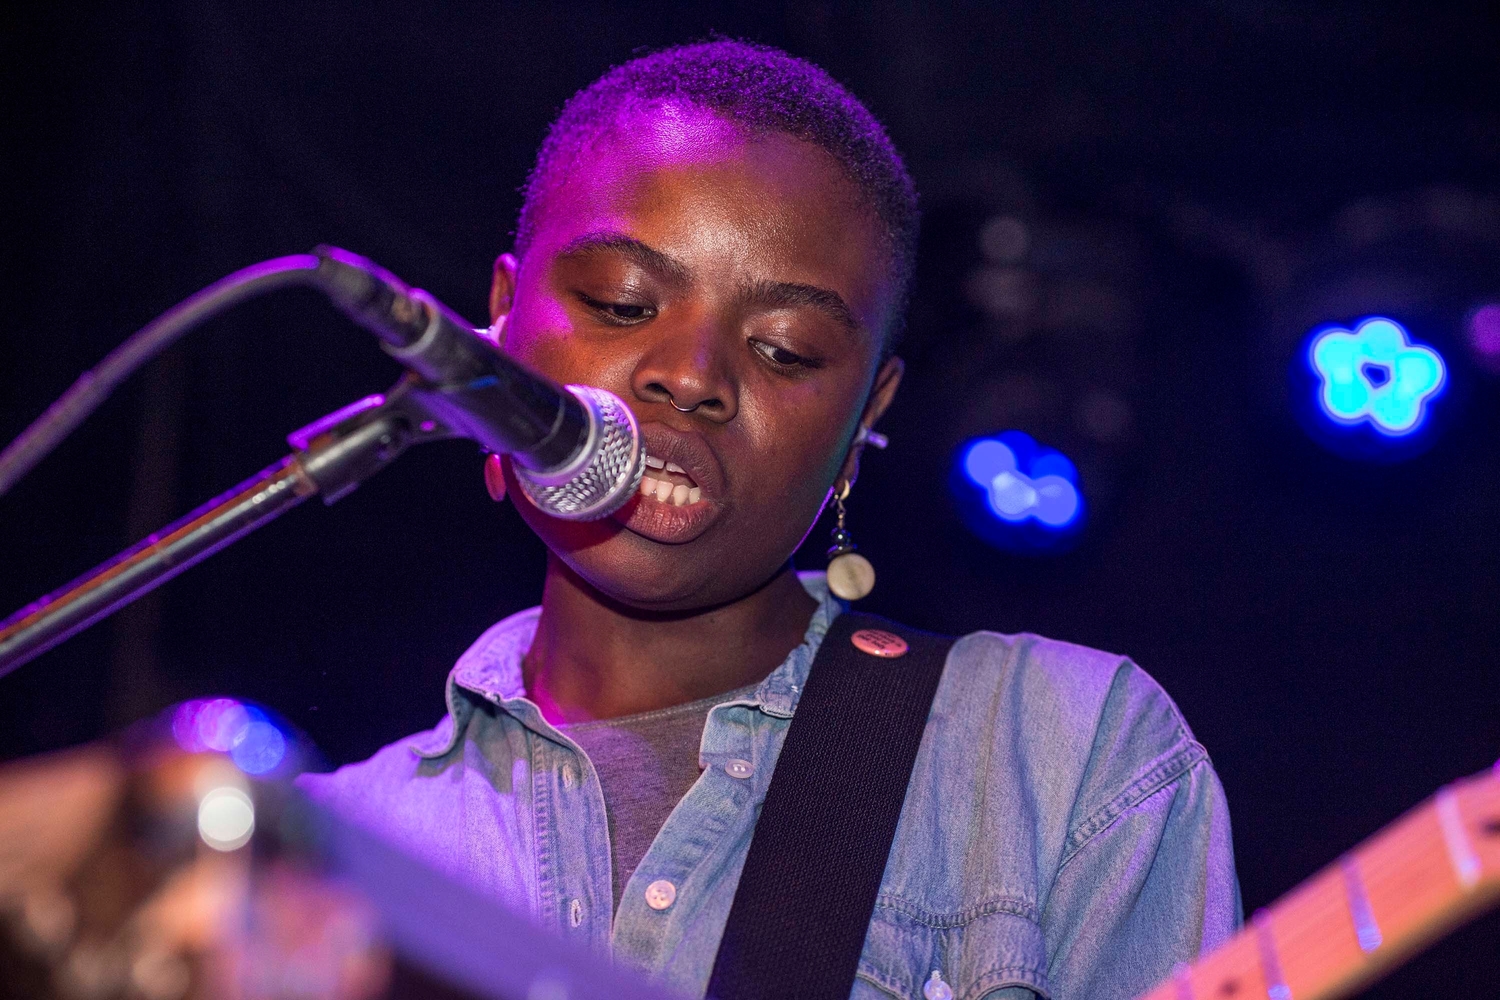 Vagabon bursts with potential at SXSW 2017